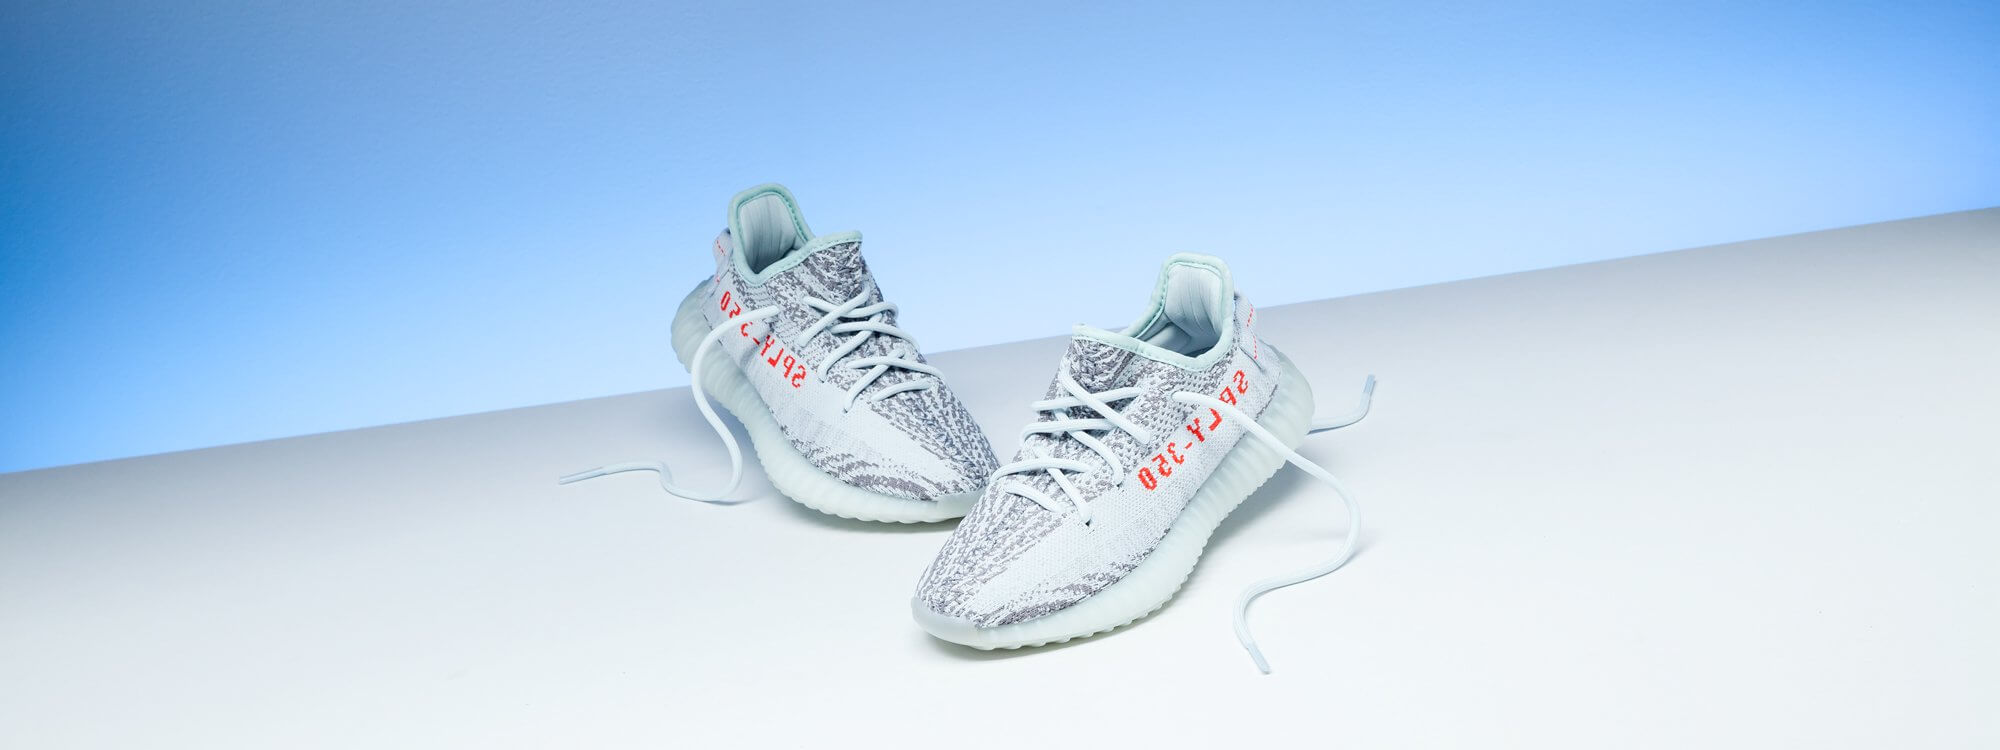 buy authentic  Yeezy 350 V2 Blue Tint for 195 USD